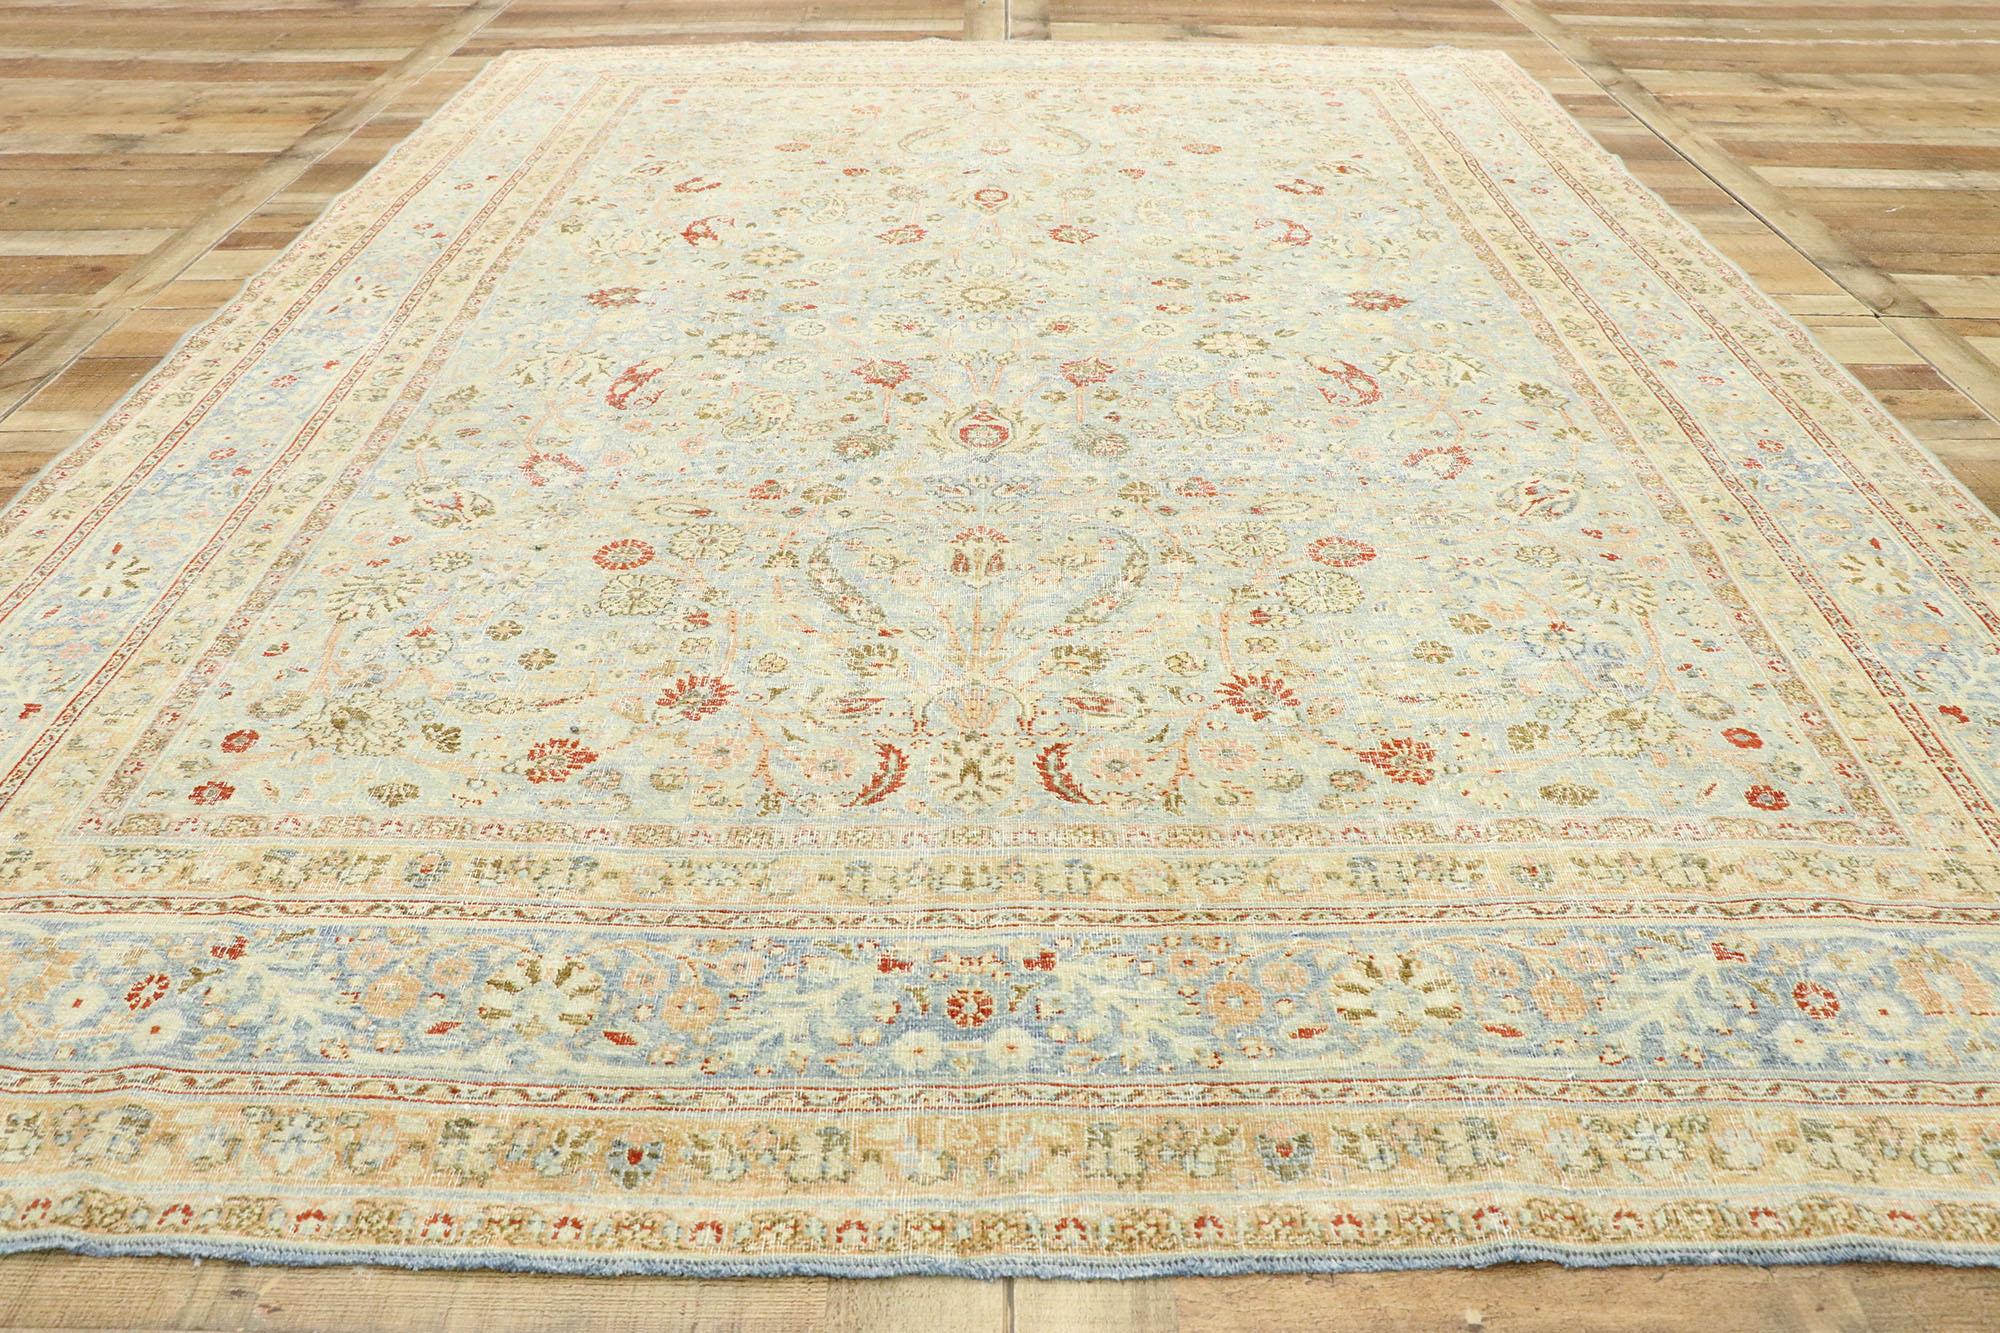 Distressed Antique Persian Khorassan Rug with Rustic English Manor Style For Sale 1